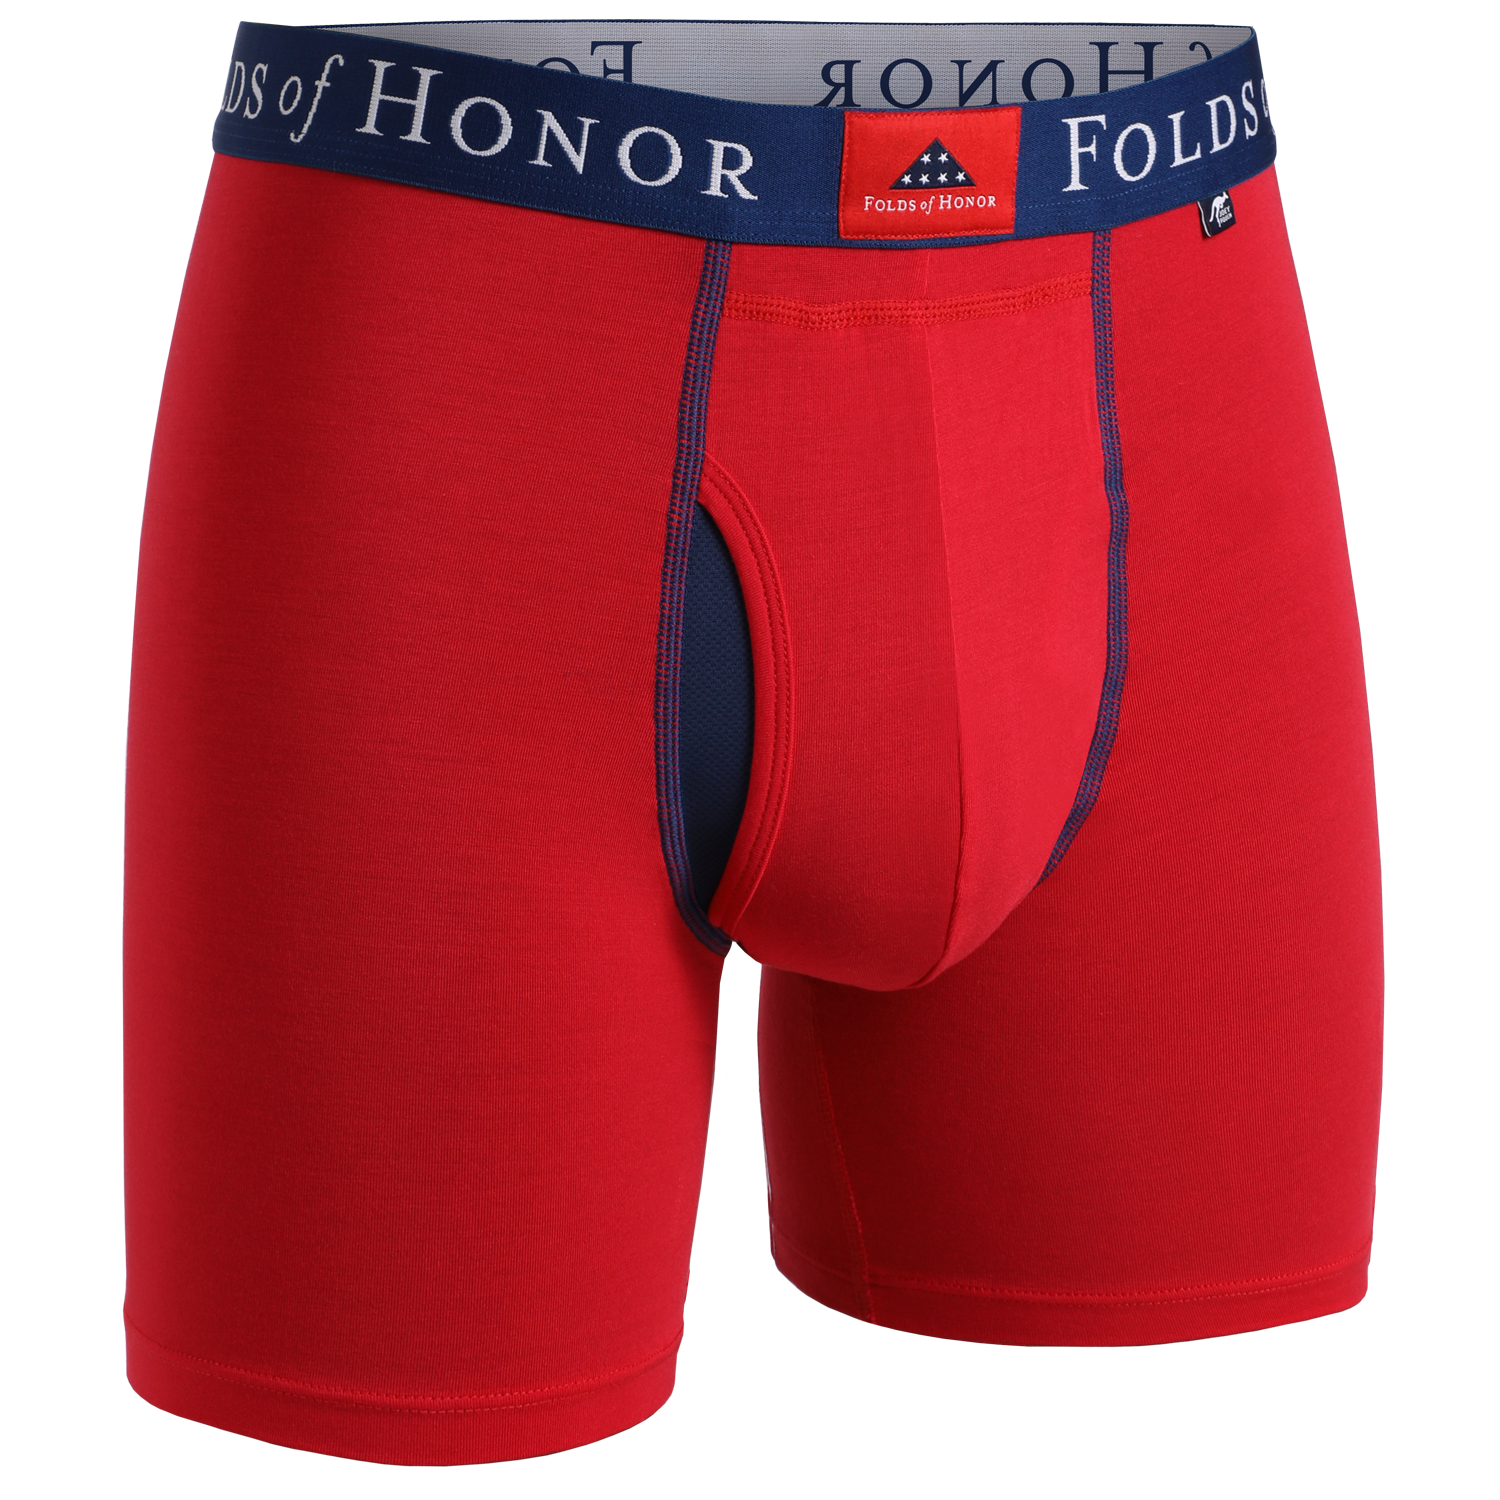 Image of Swing Shift Boxer Brief - Folds of Honor  - Red